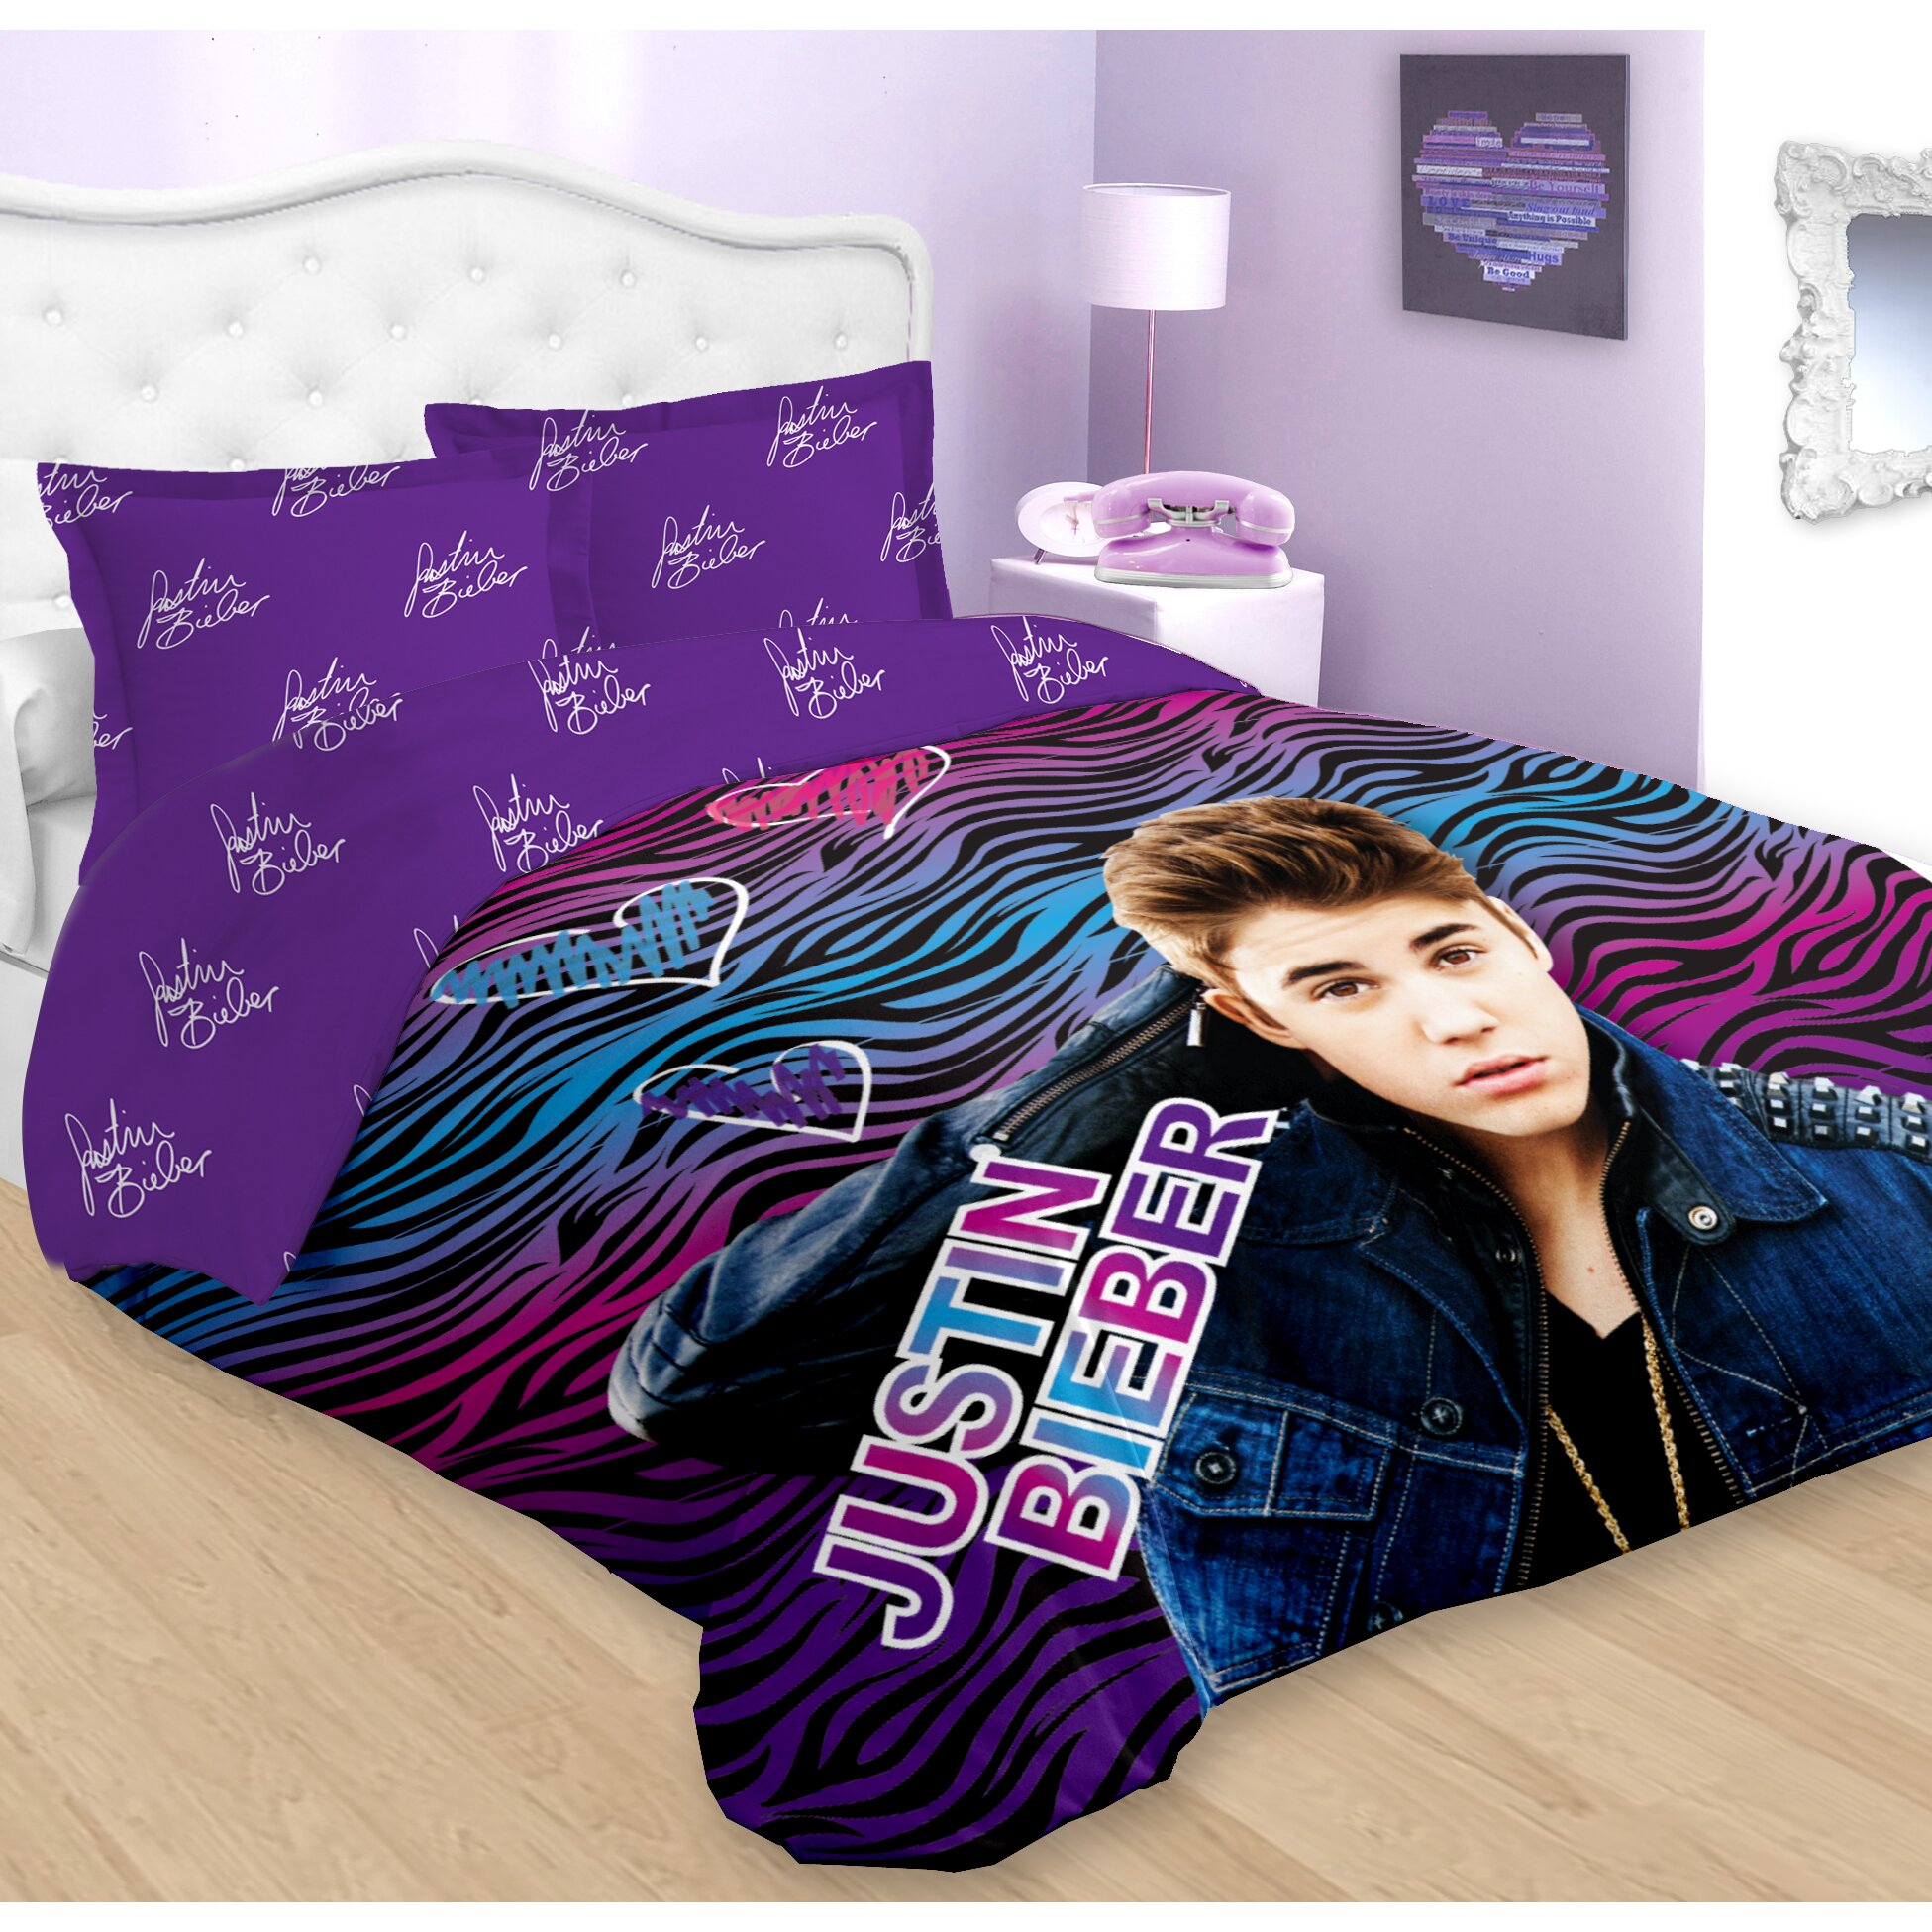 Creatice Justin Bieber Bedroom Decorating Ideas for Small Space